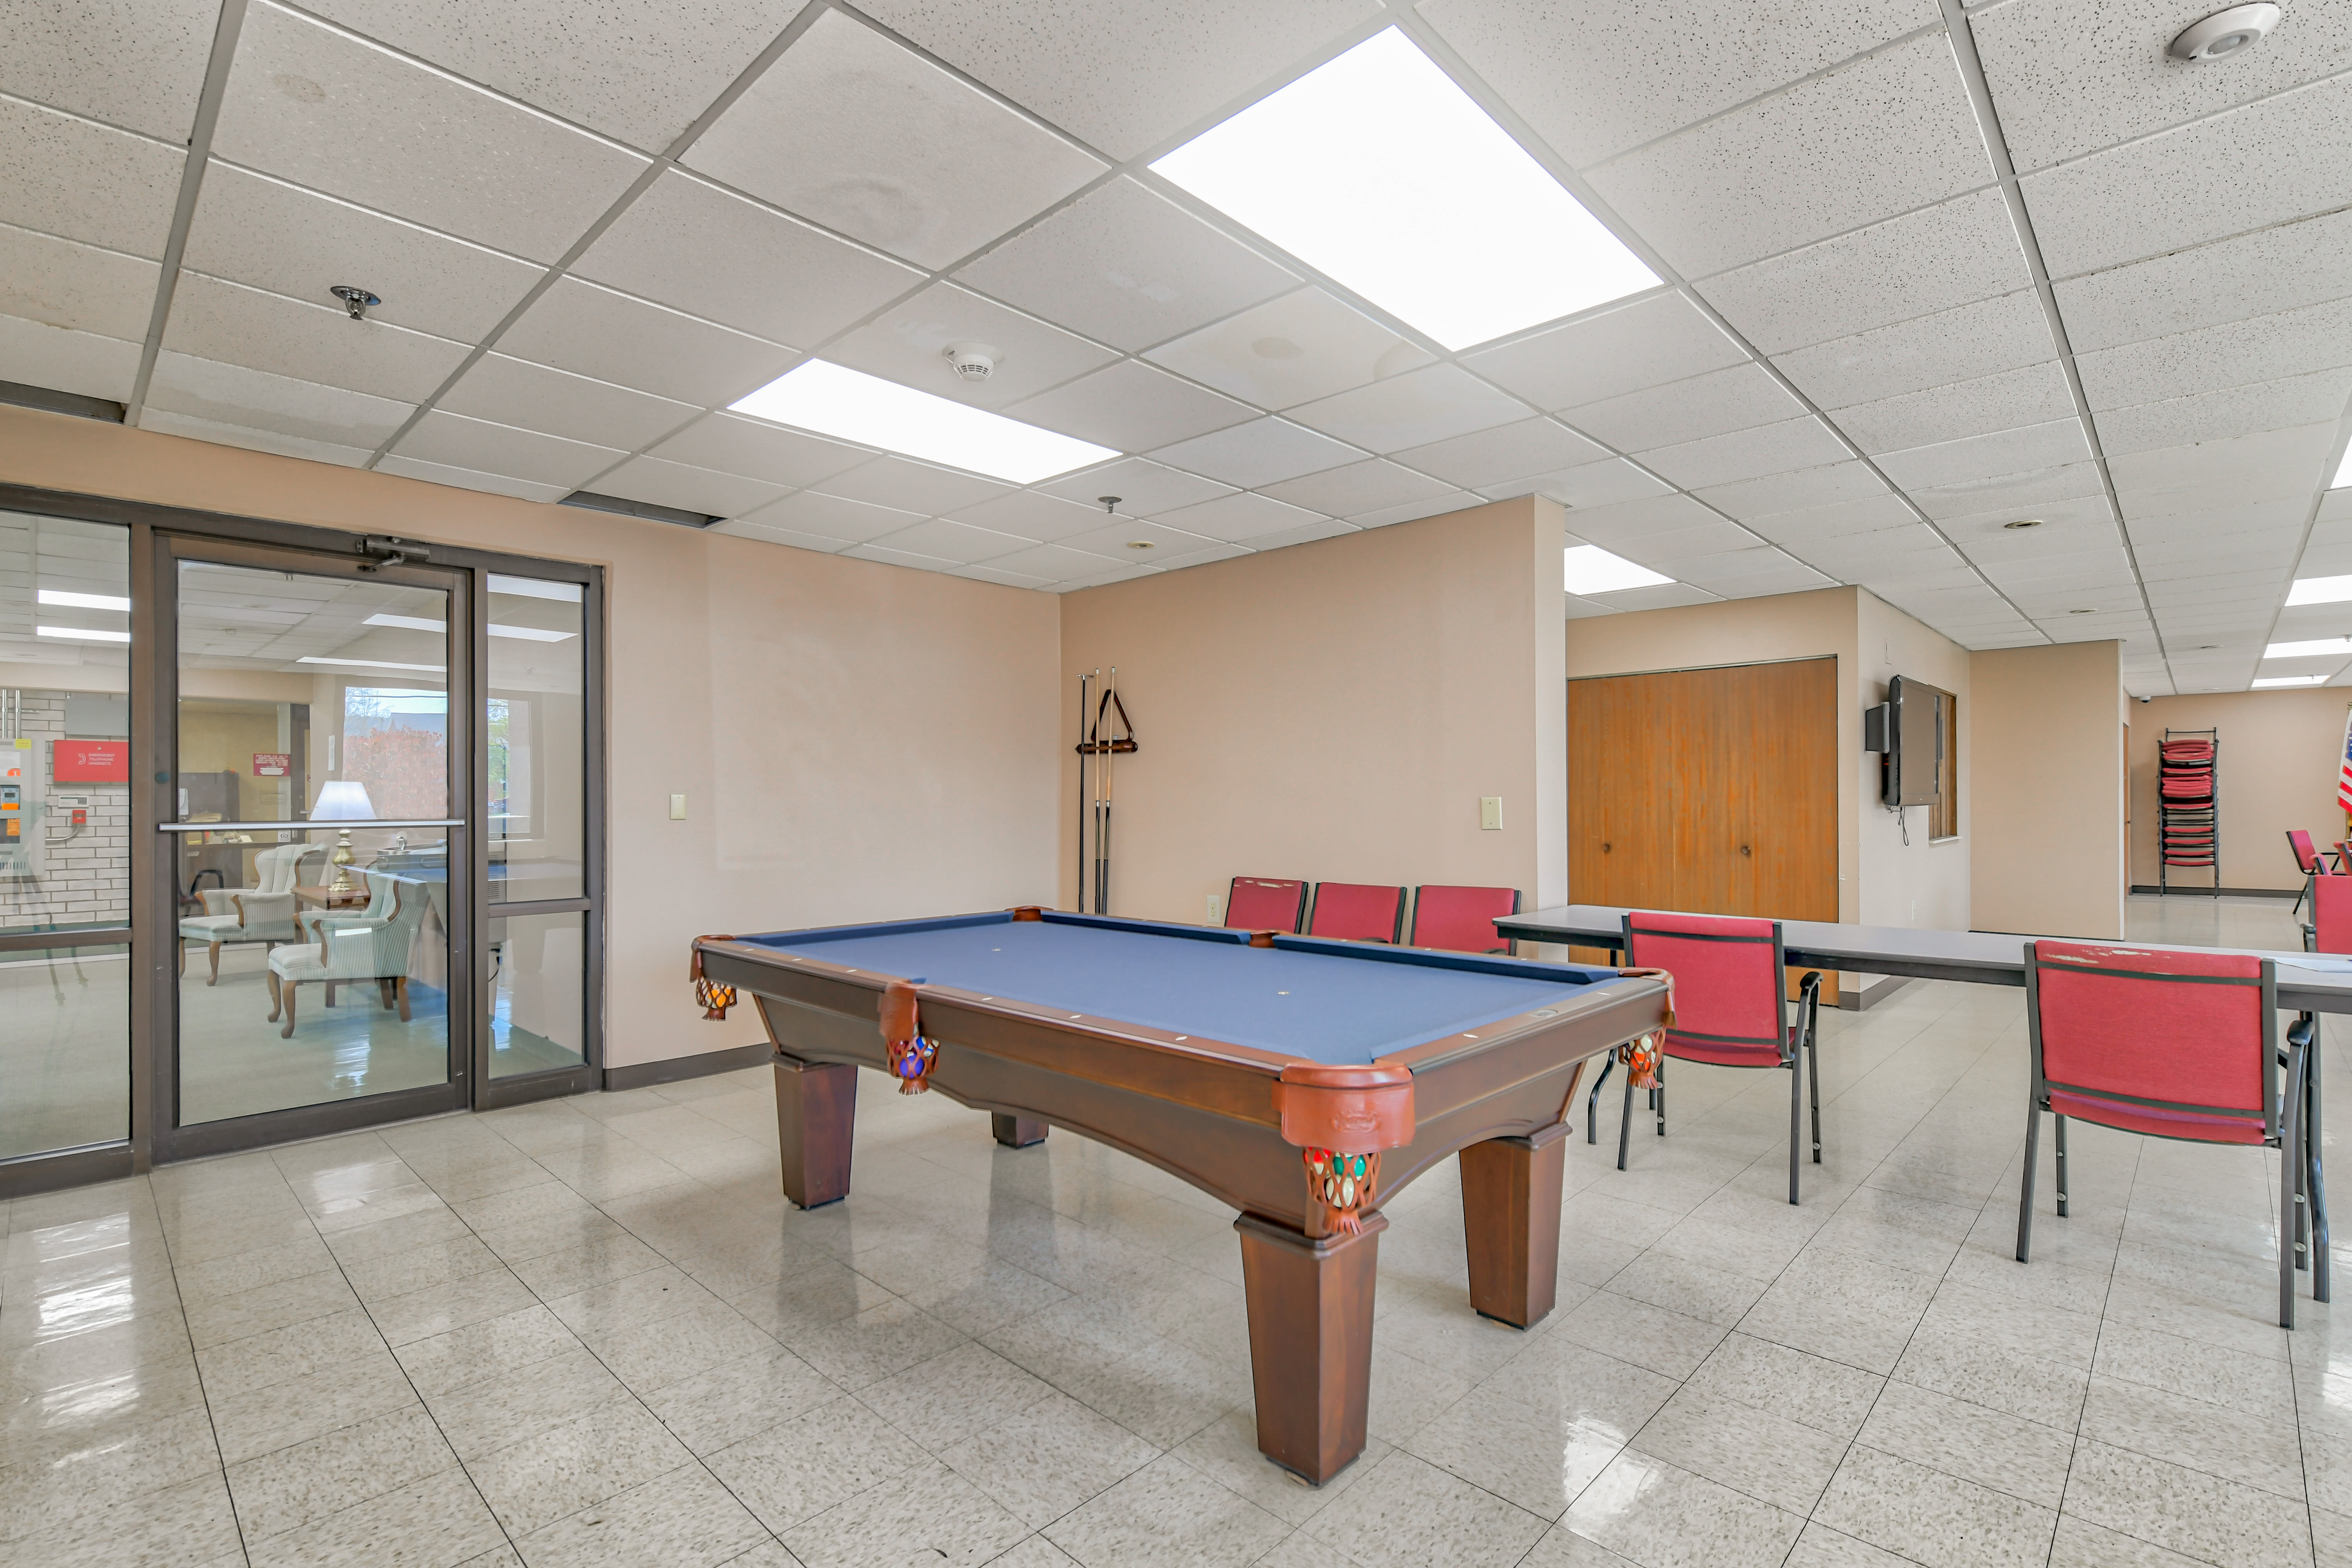 Citizen's Plaza offers a wide variety of amenities in New Kensington, Pennsylvania